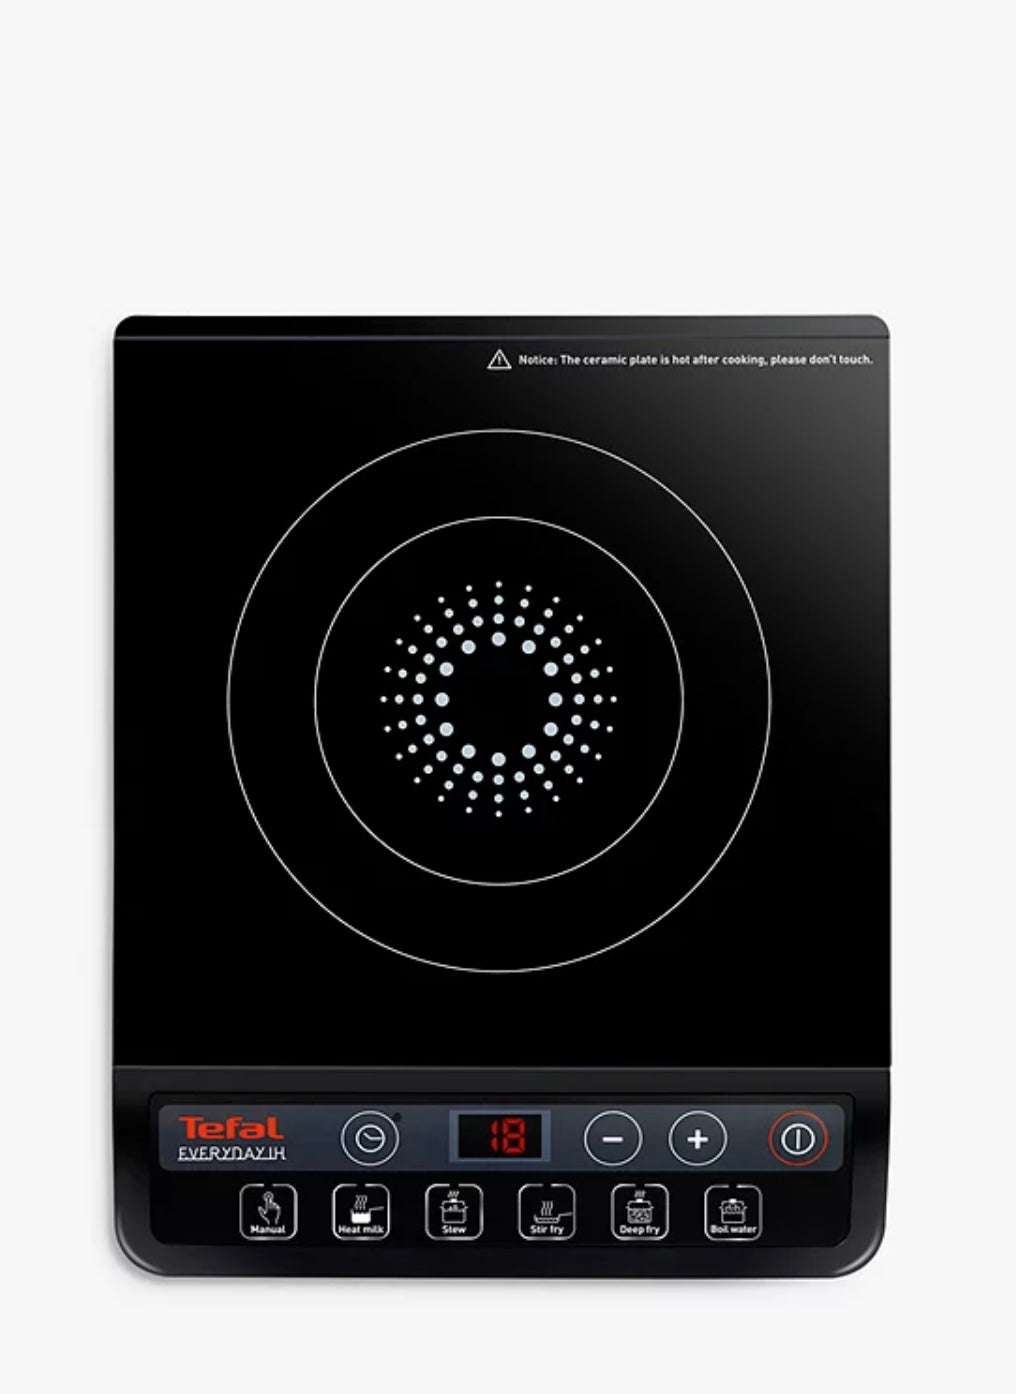 Tefal IH201840 Everyday Portable Induction Hob, Black RRP £84.99